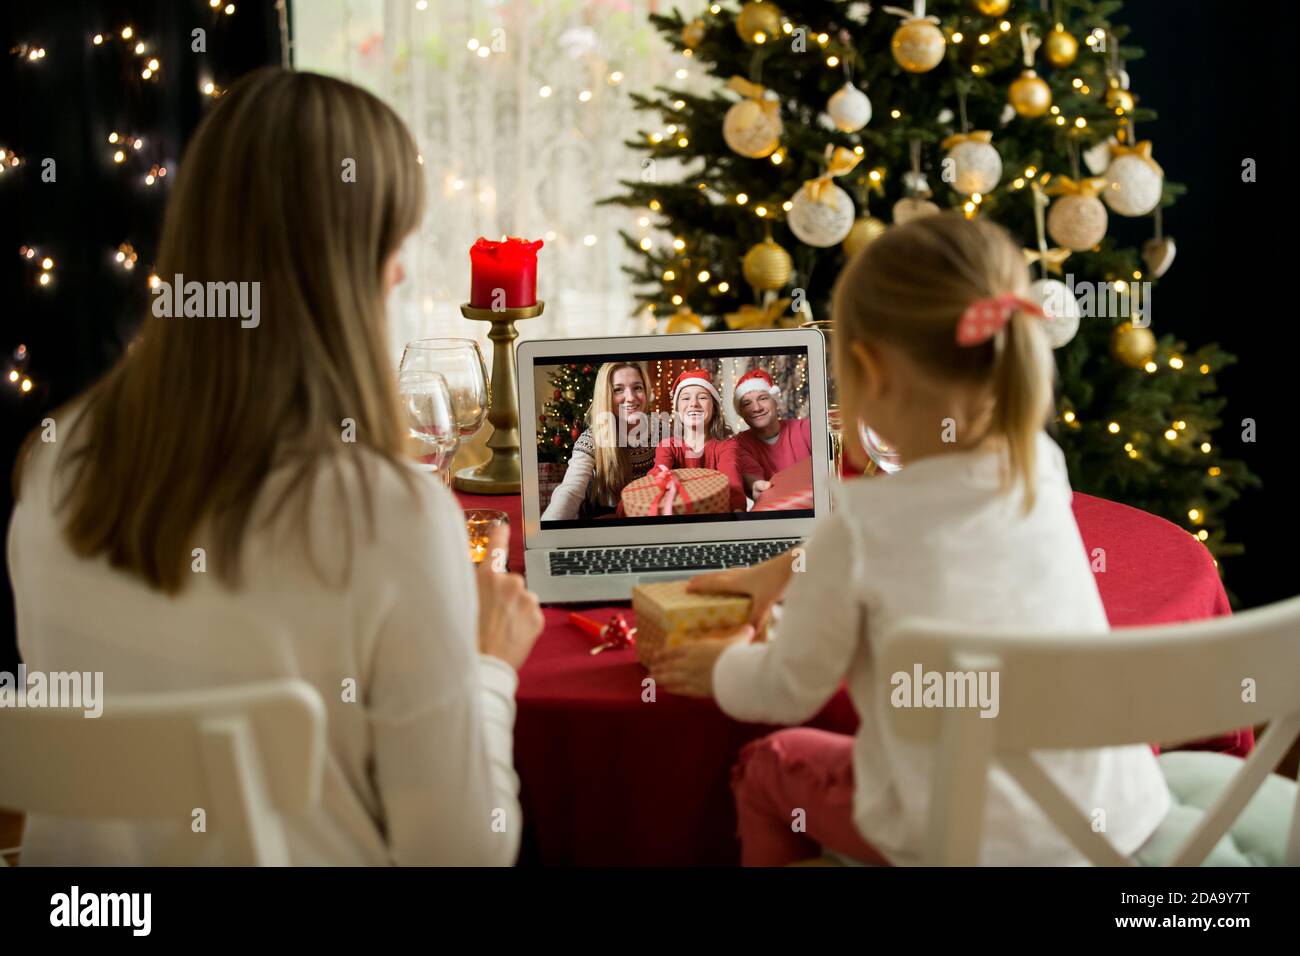 A happy family with a child is celebrating Christmas with their friends on video call using webcam. Family greeting their relatives on Christmas eve Stock Photo